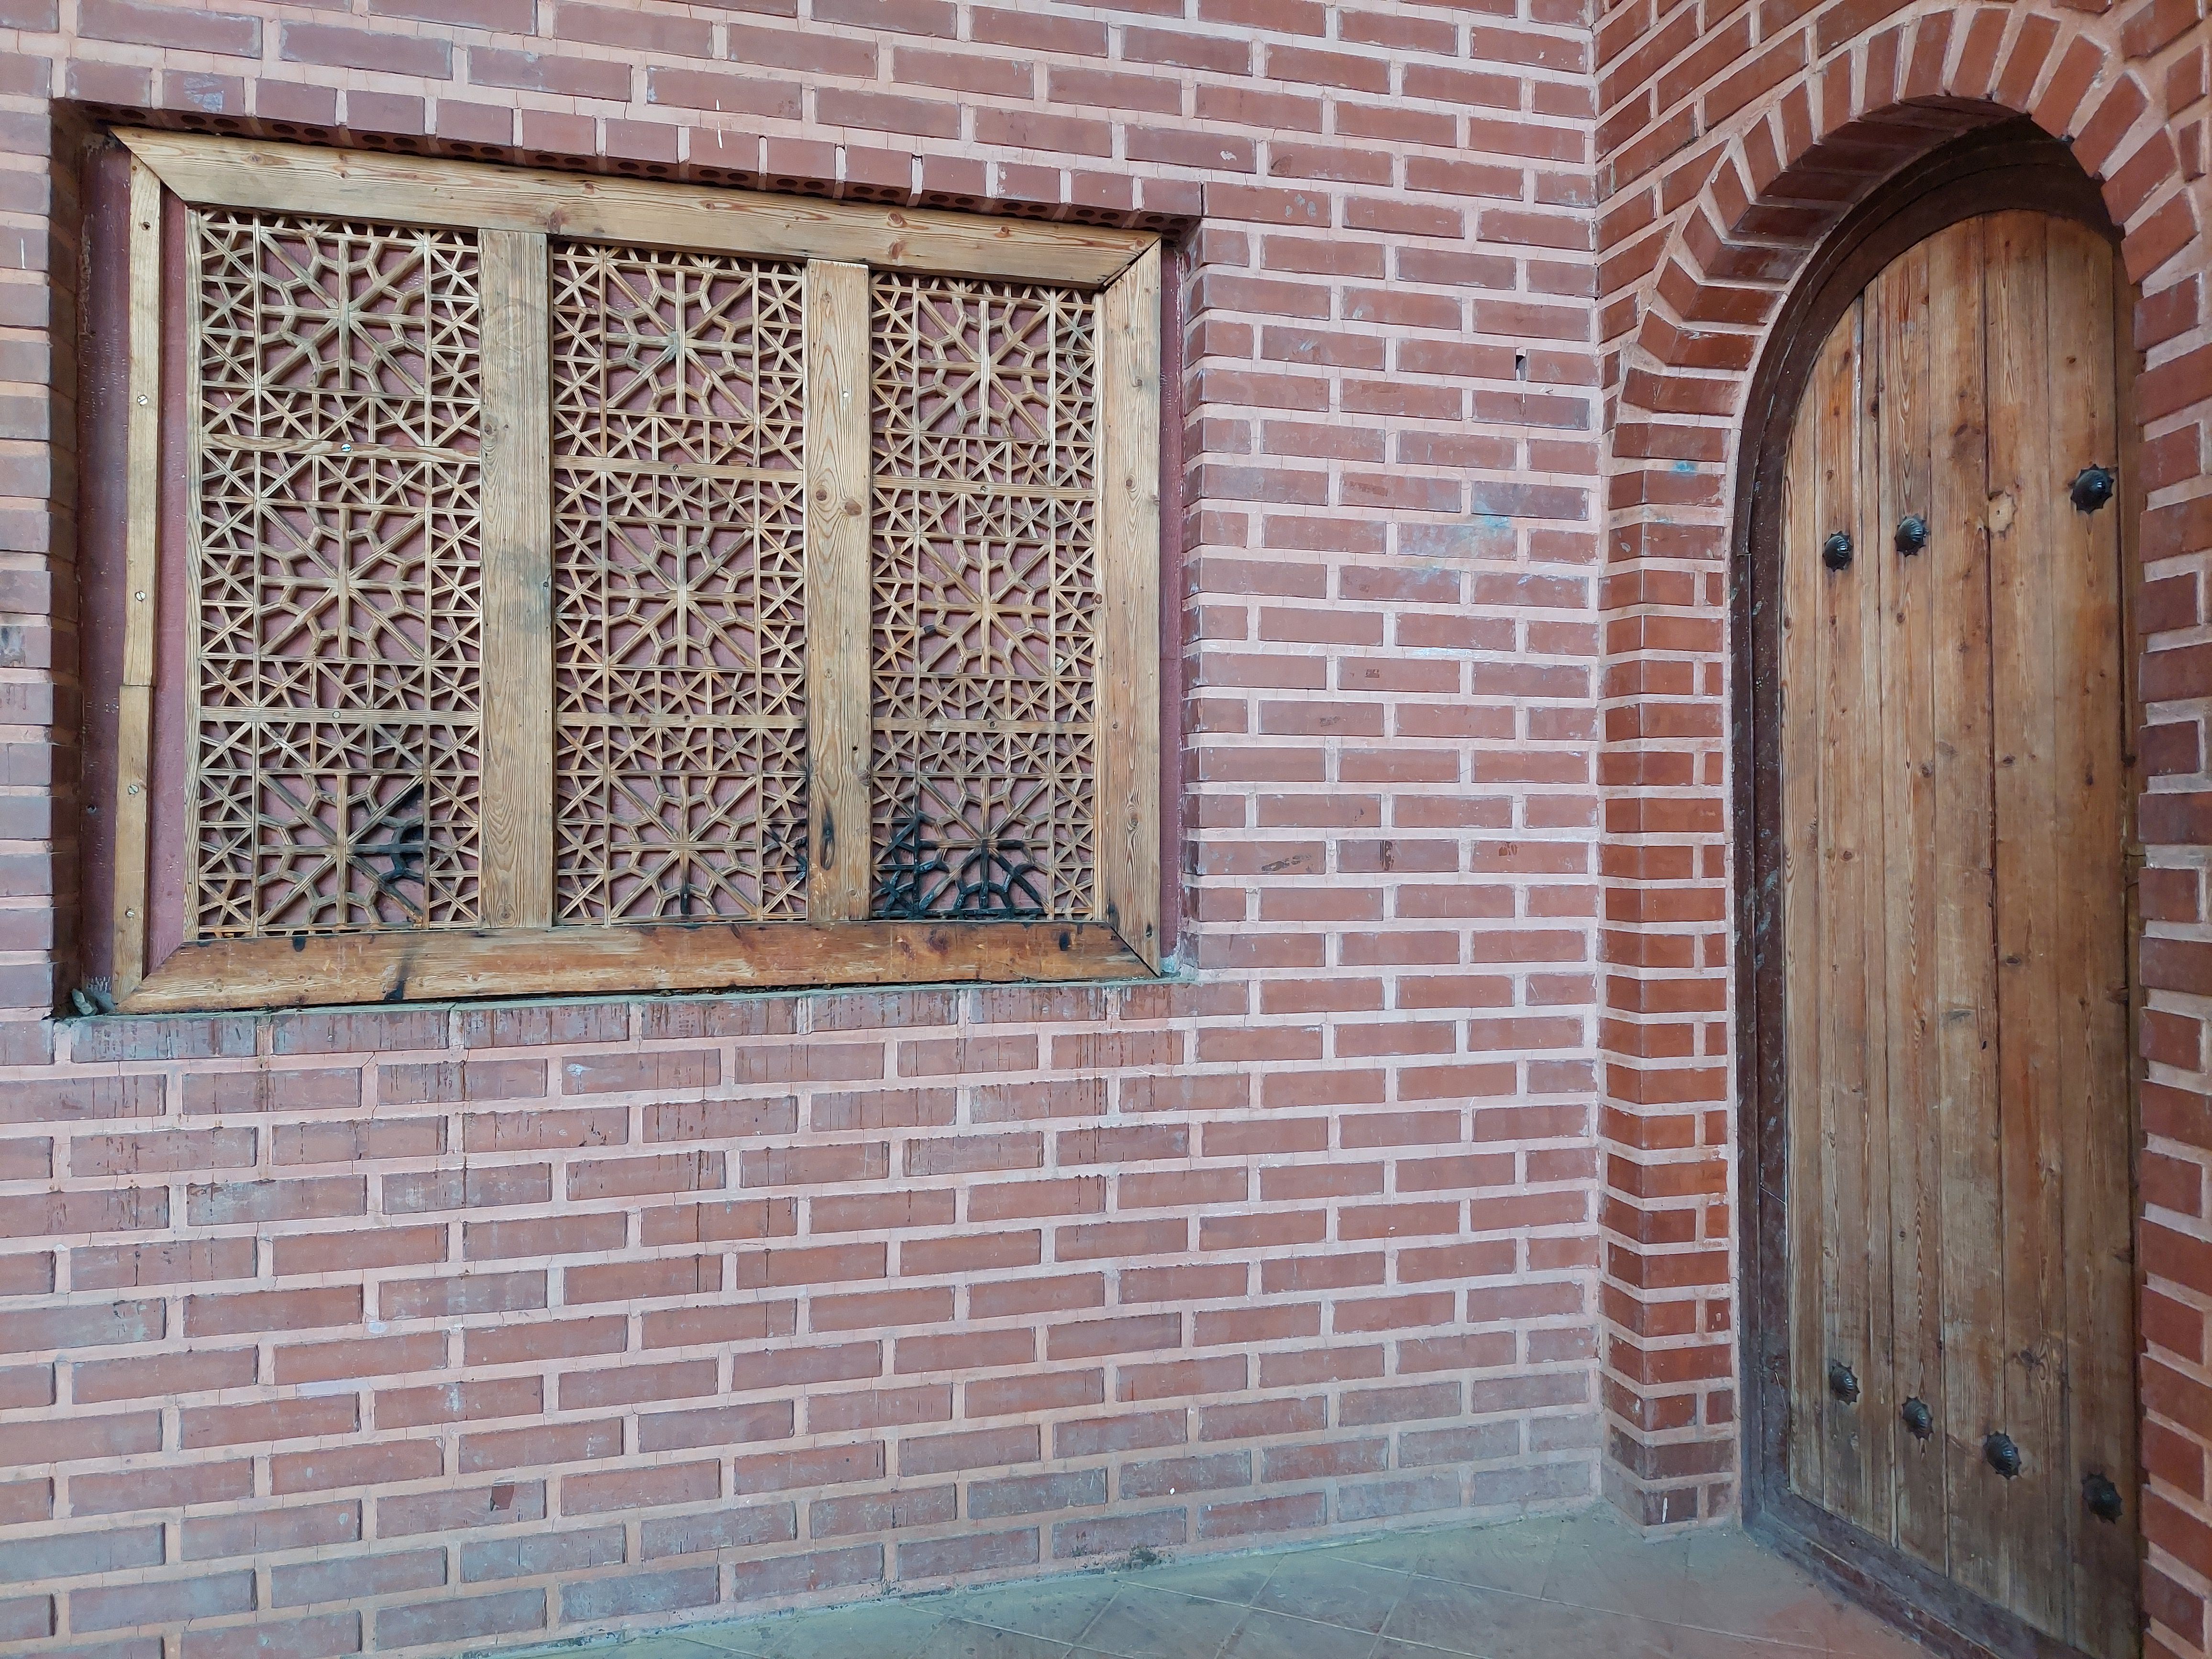 Sample photo of Galaxy A52 wide-angle camera in good light - brickwork with wooden doors and windows in Saba Park, Jordan Street